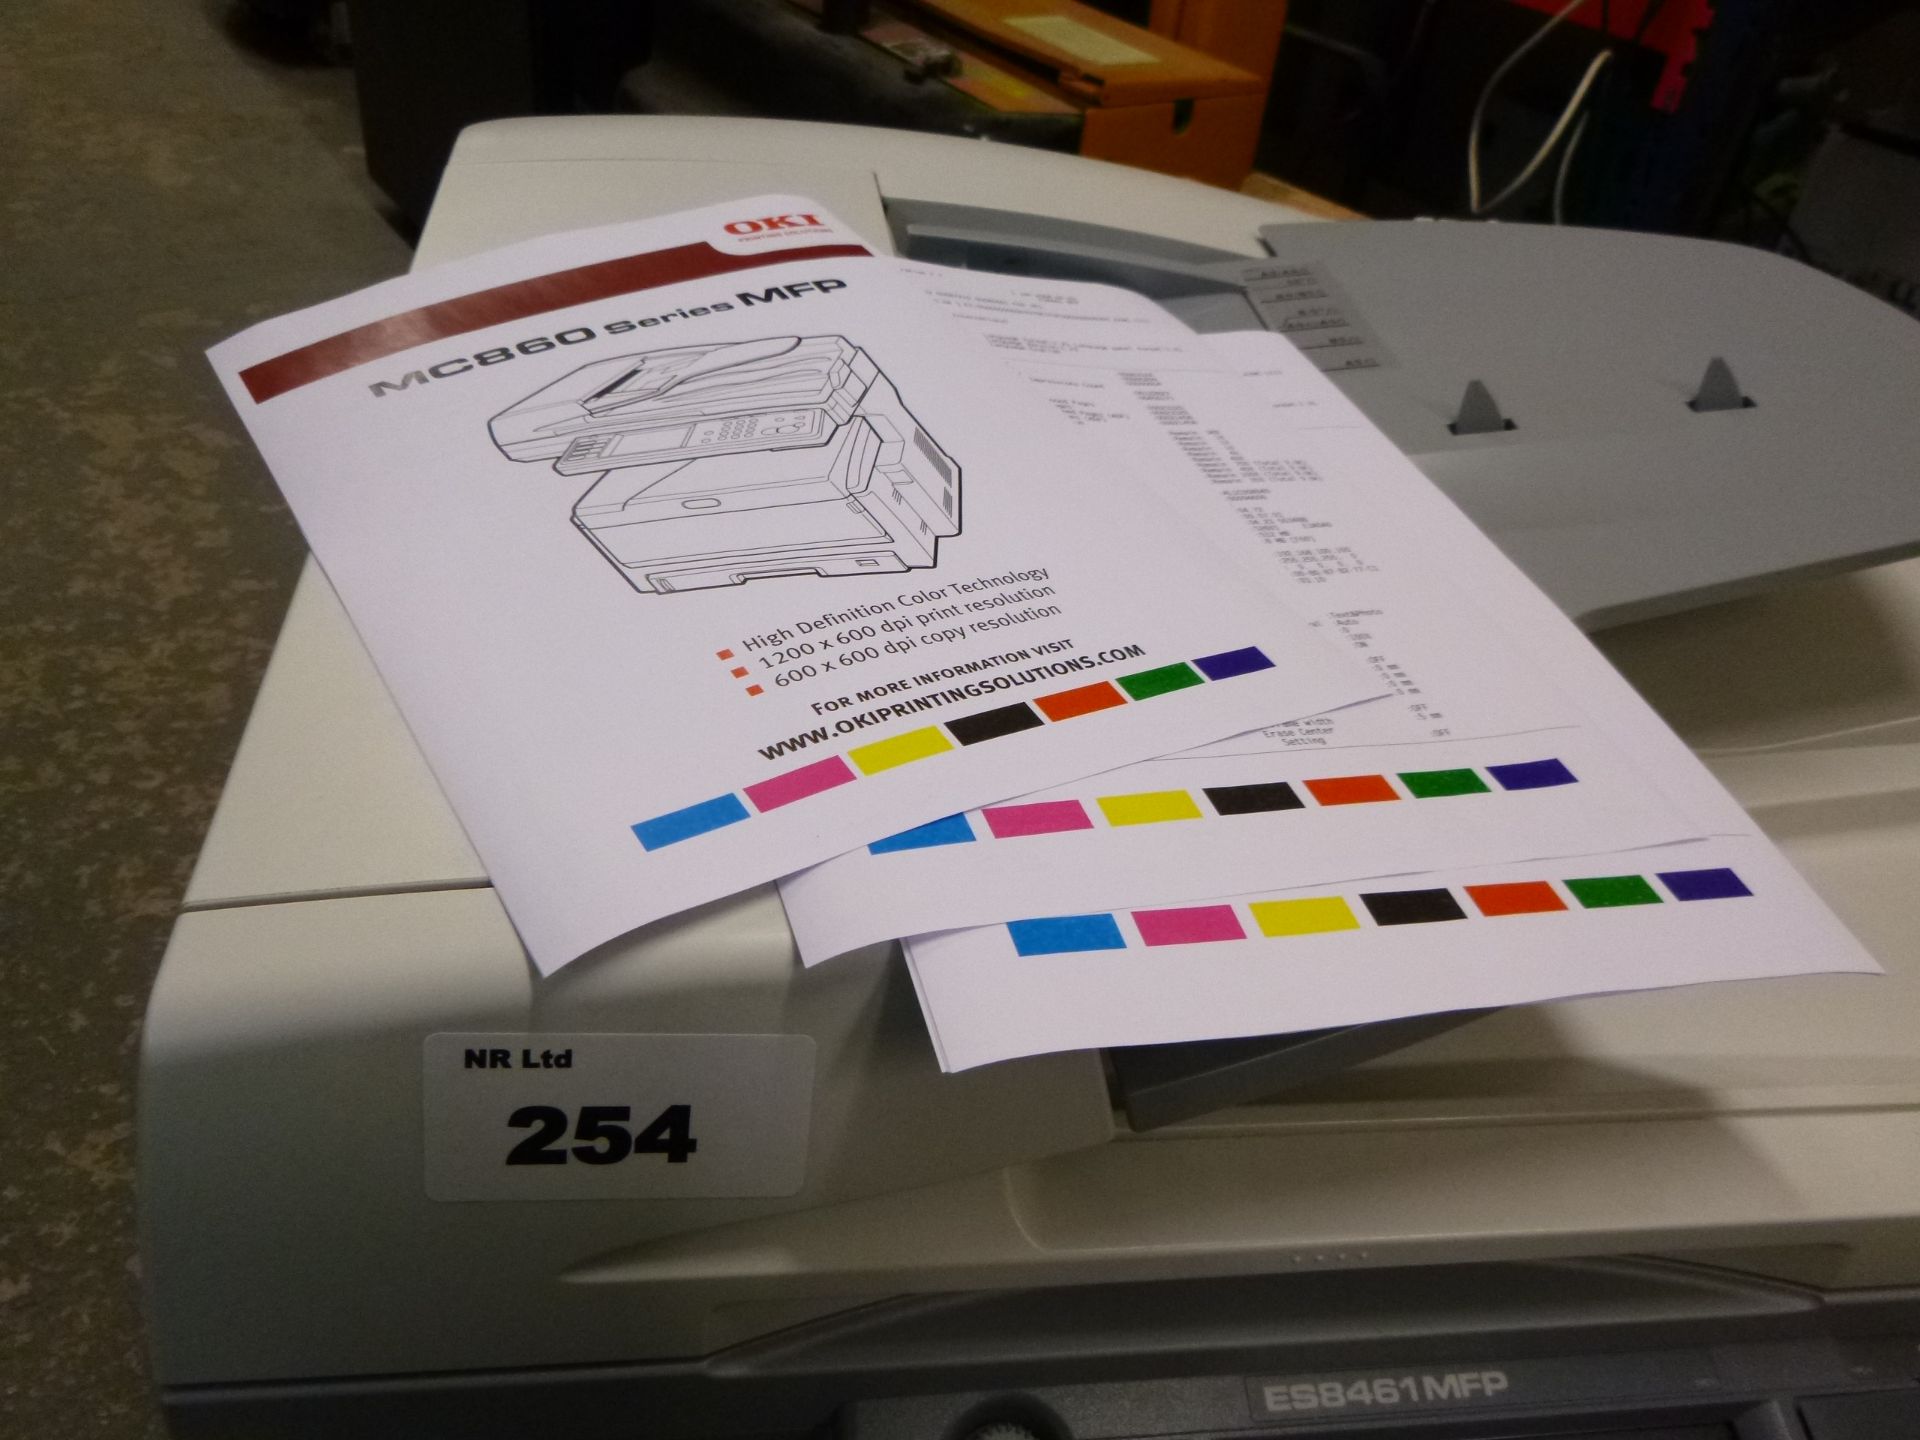 OKI ES8460 MFP COLOUR LASER PRINTER. ON WHEELS WITH 3 PAPER TRAYS, TEST PRINT & COPY. - Image 2 of 2